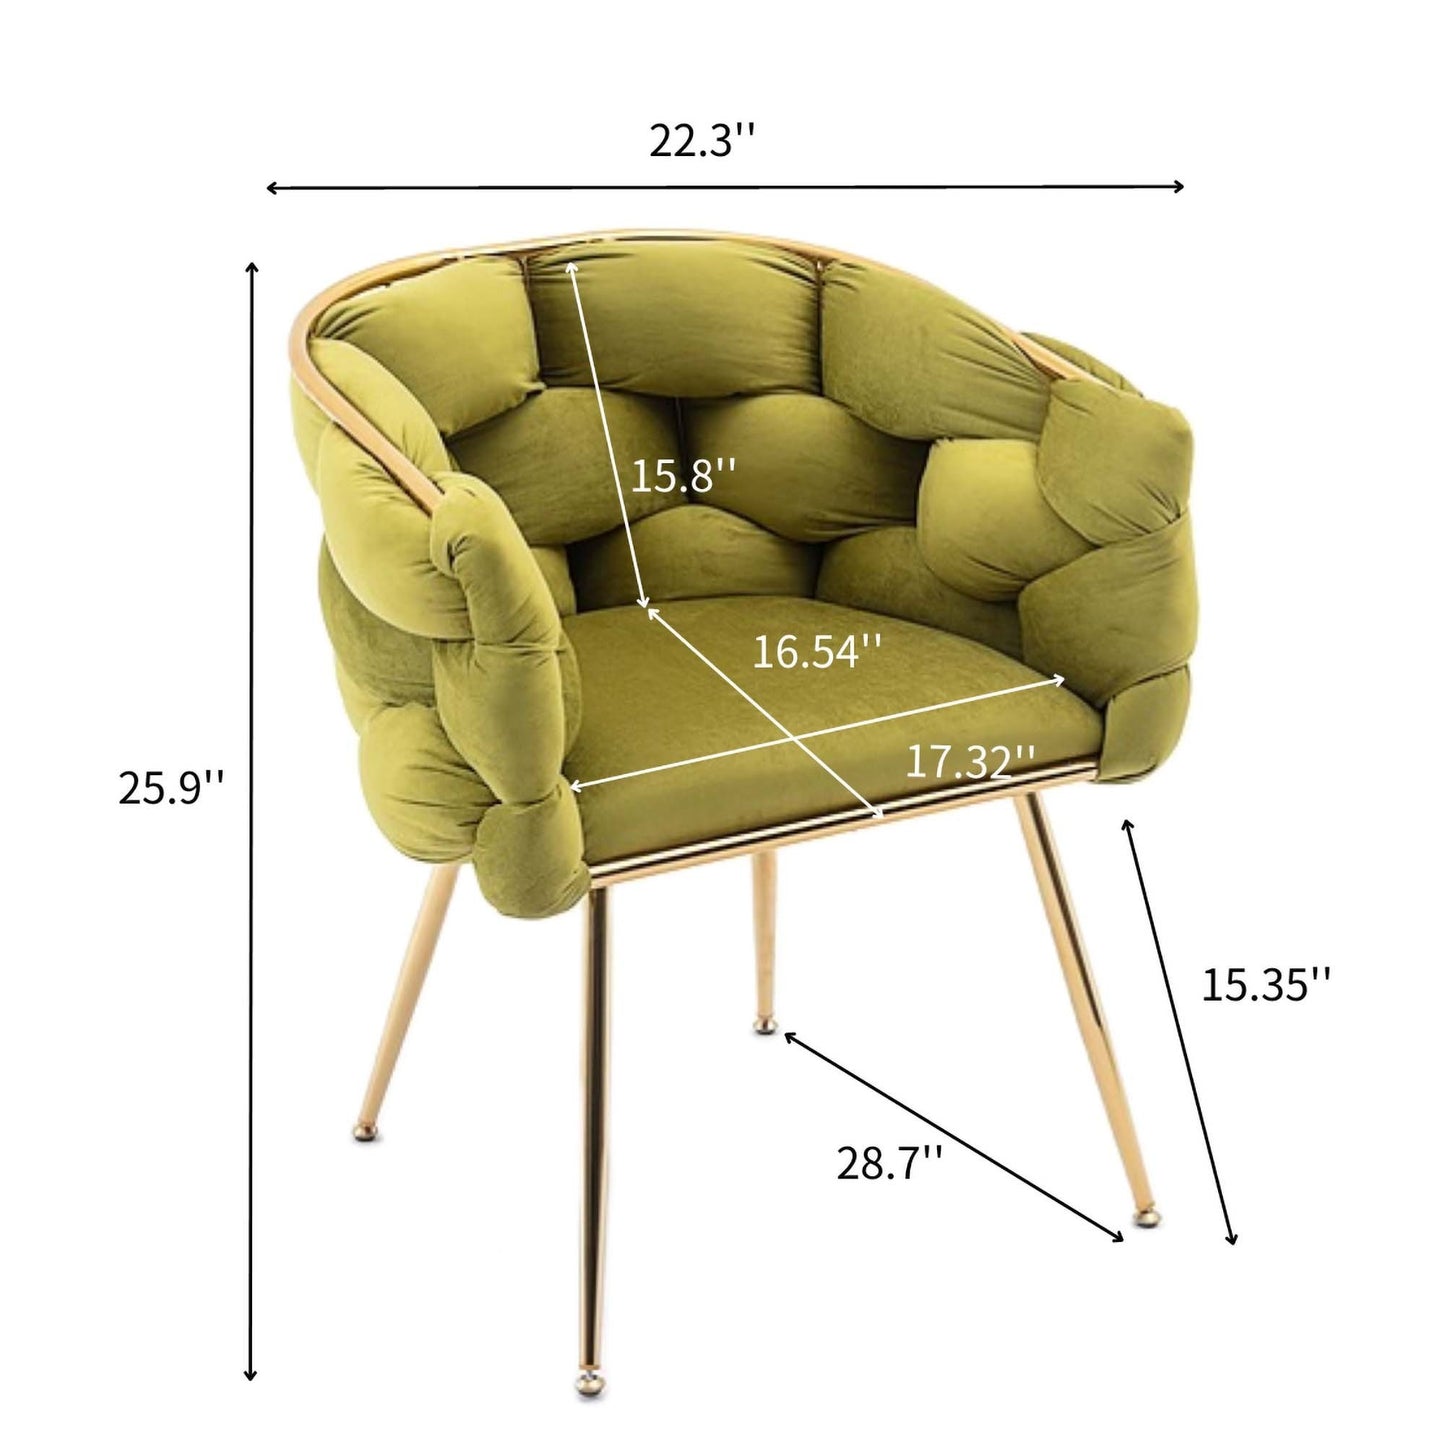 Luxury modern simple leisure velvet single sofa chair bedroom lazy person household dresser stool manicure table back chair olive green